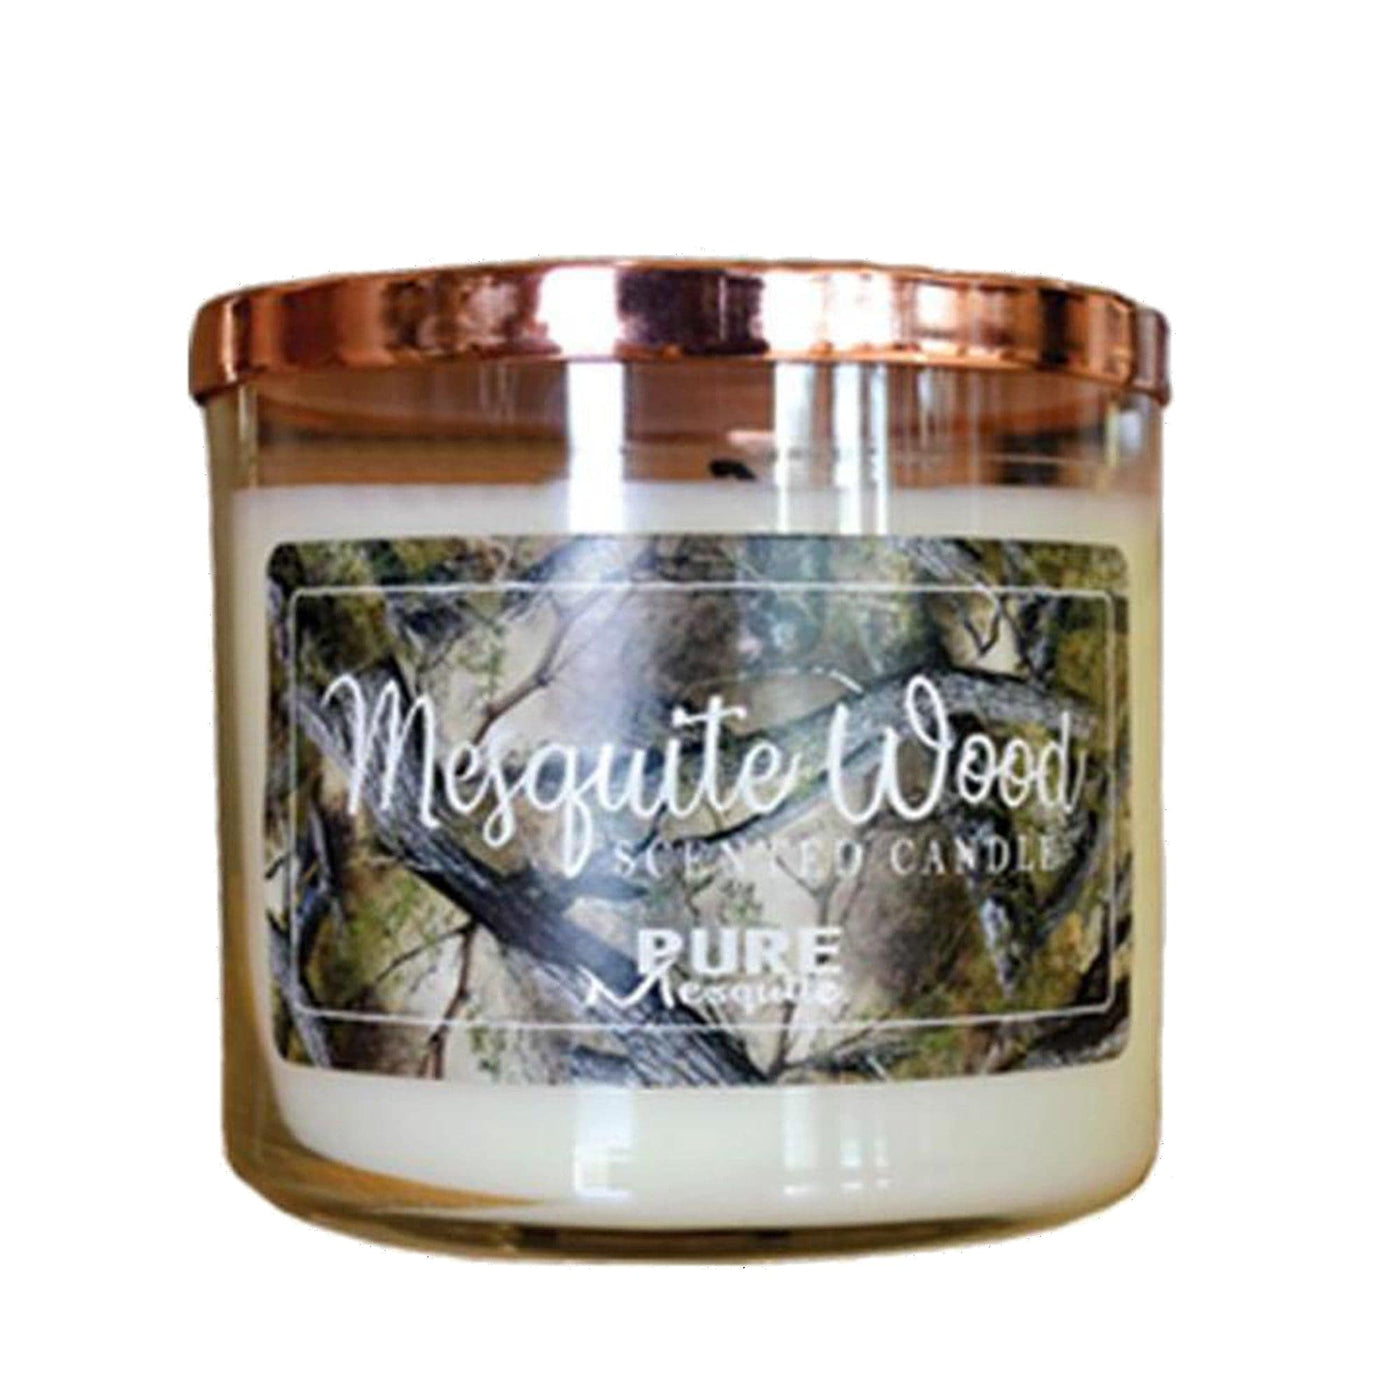 Pure Mesquite Pure Mesquite Candle - Mesquite Wood Scent Other